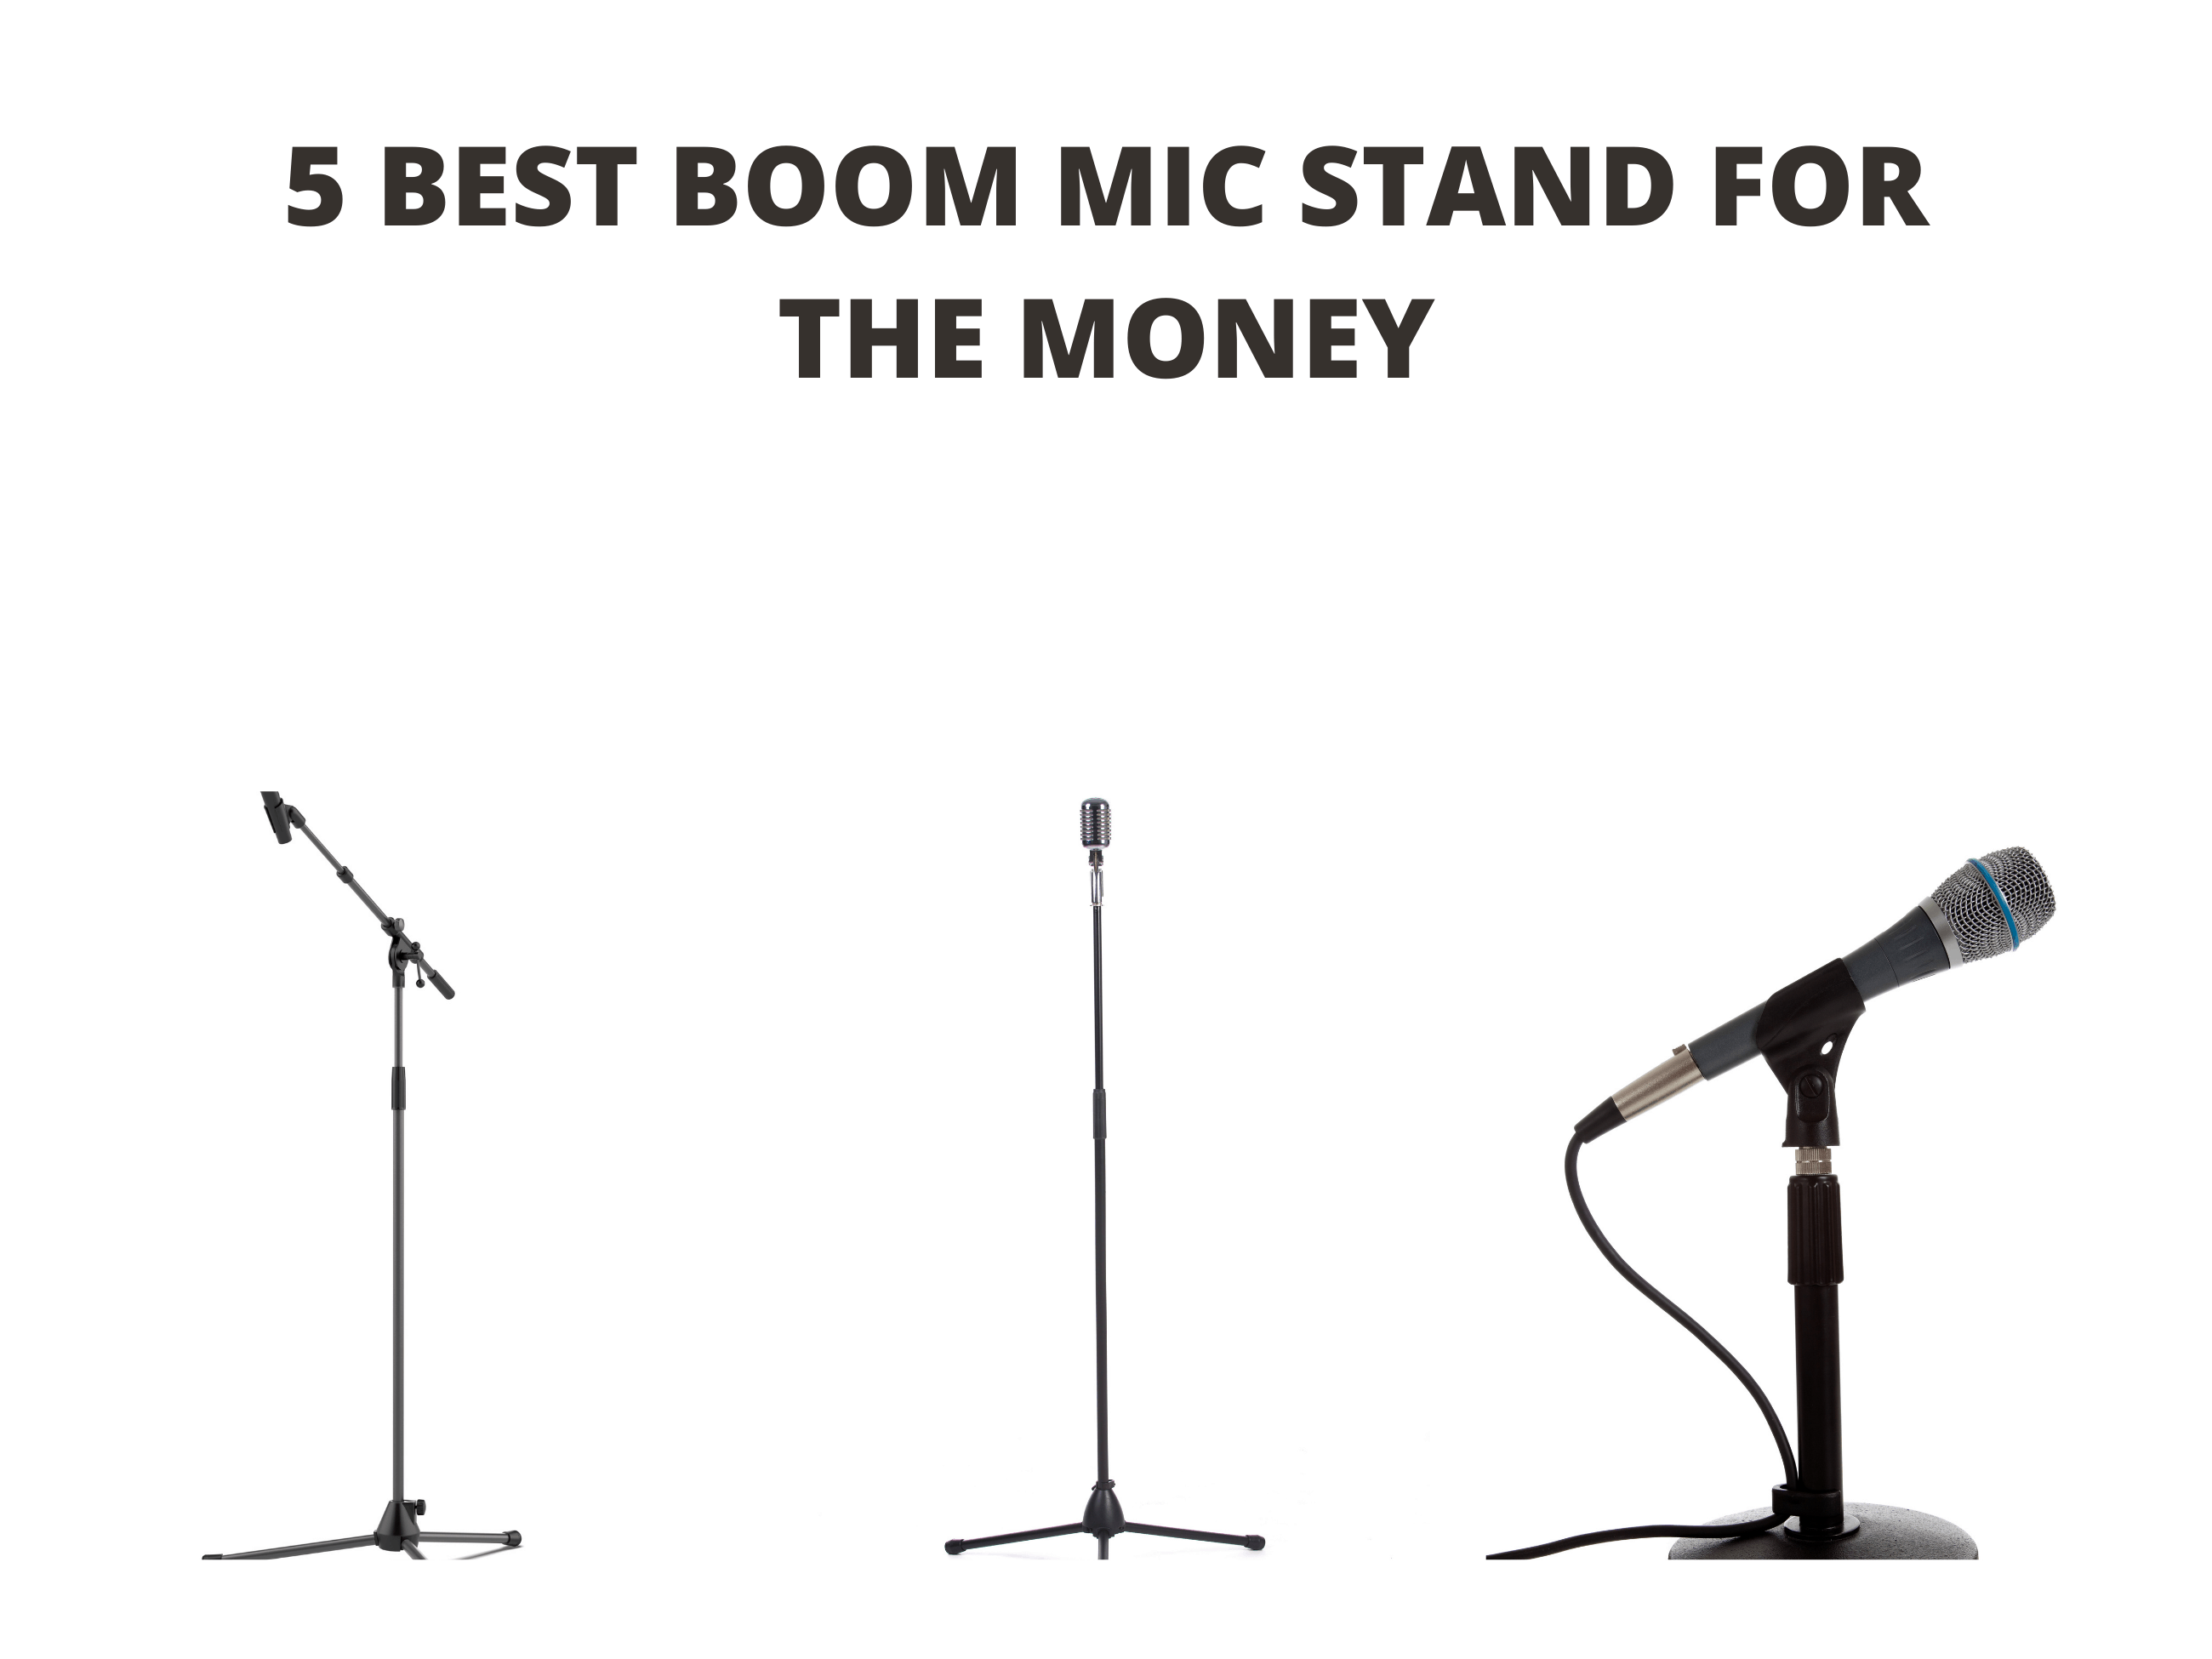 5 Best Boom Mic Stand for the Money (2022 Reviews)